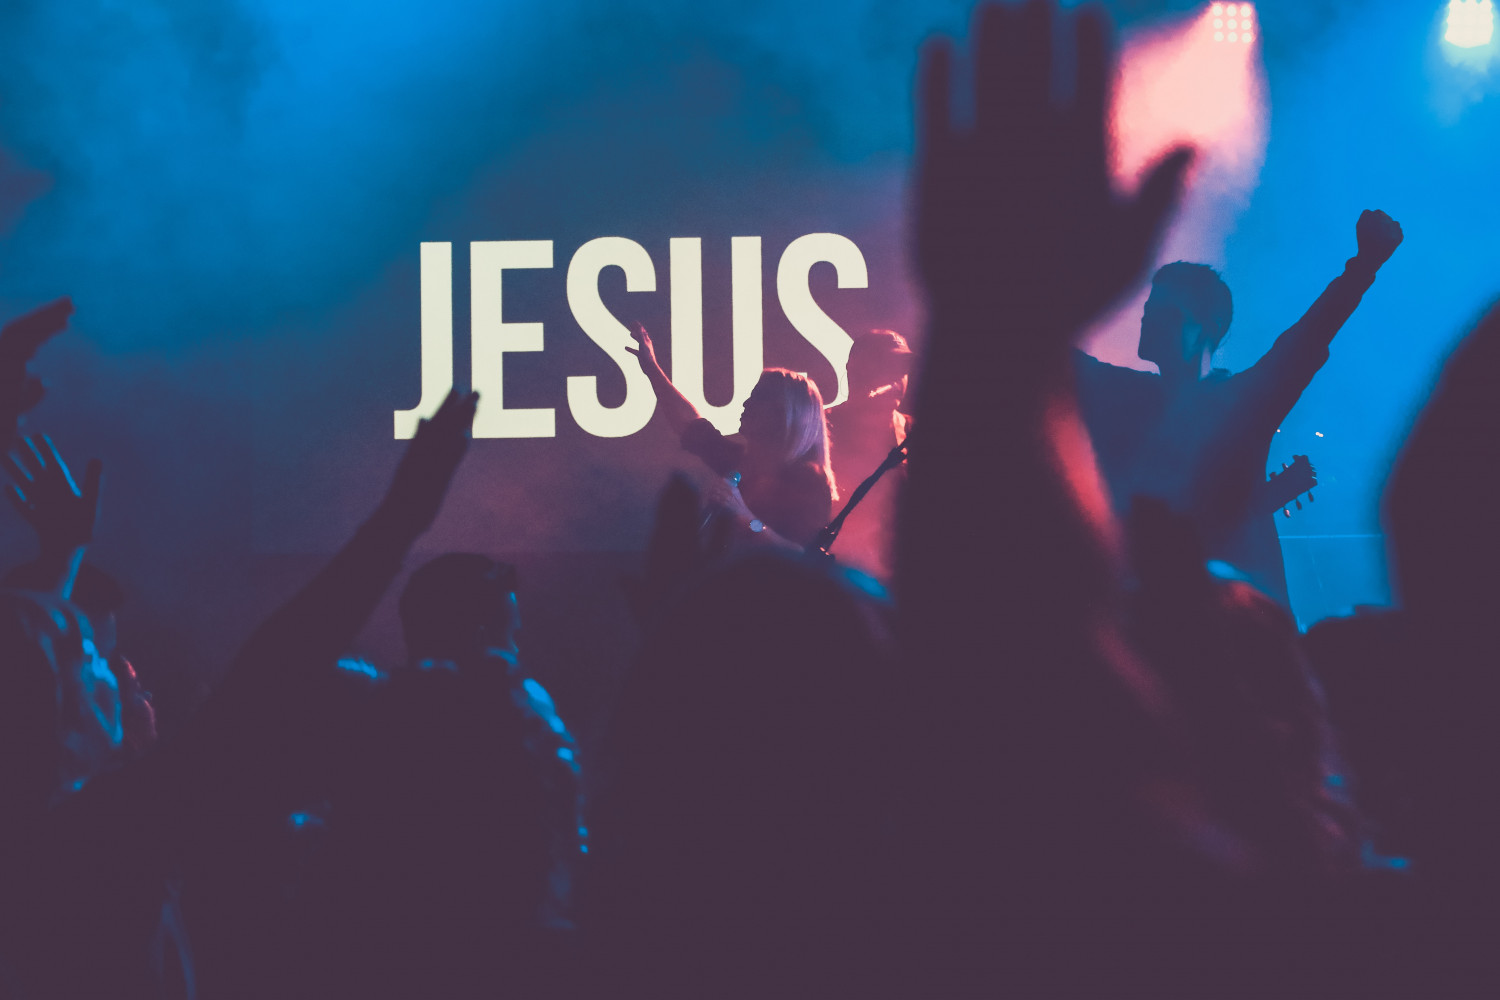 Image of people worshipping in front of a sign that says 'Jesus'